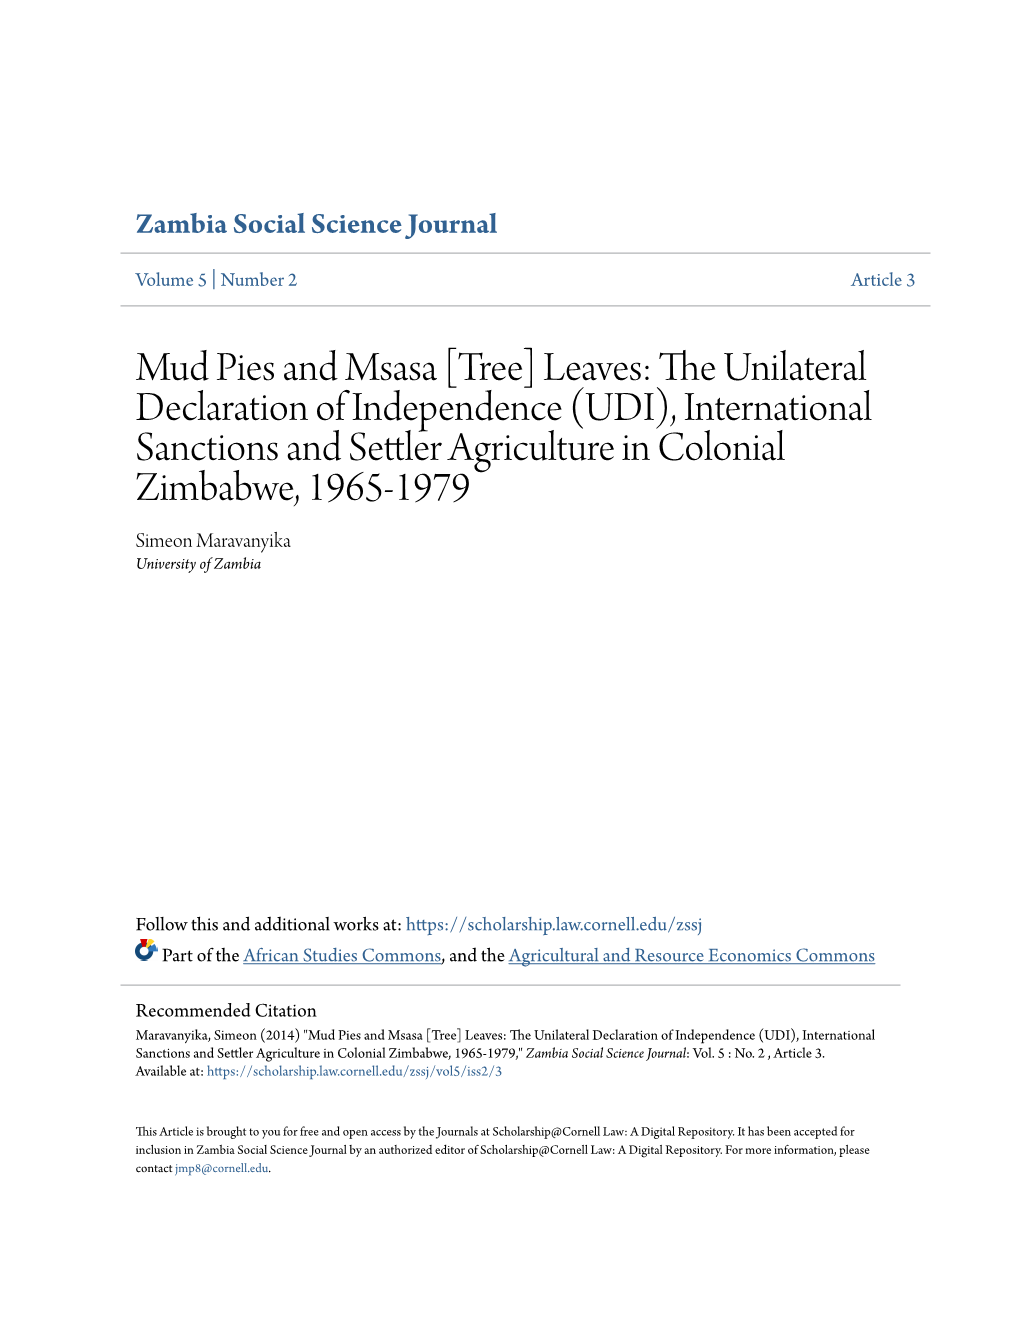 The Unilateral Declaration of Independence (UDI), International Sanctions and Settler Agriculture in Colonial Zimbabwe, 1965-1979